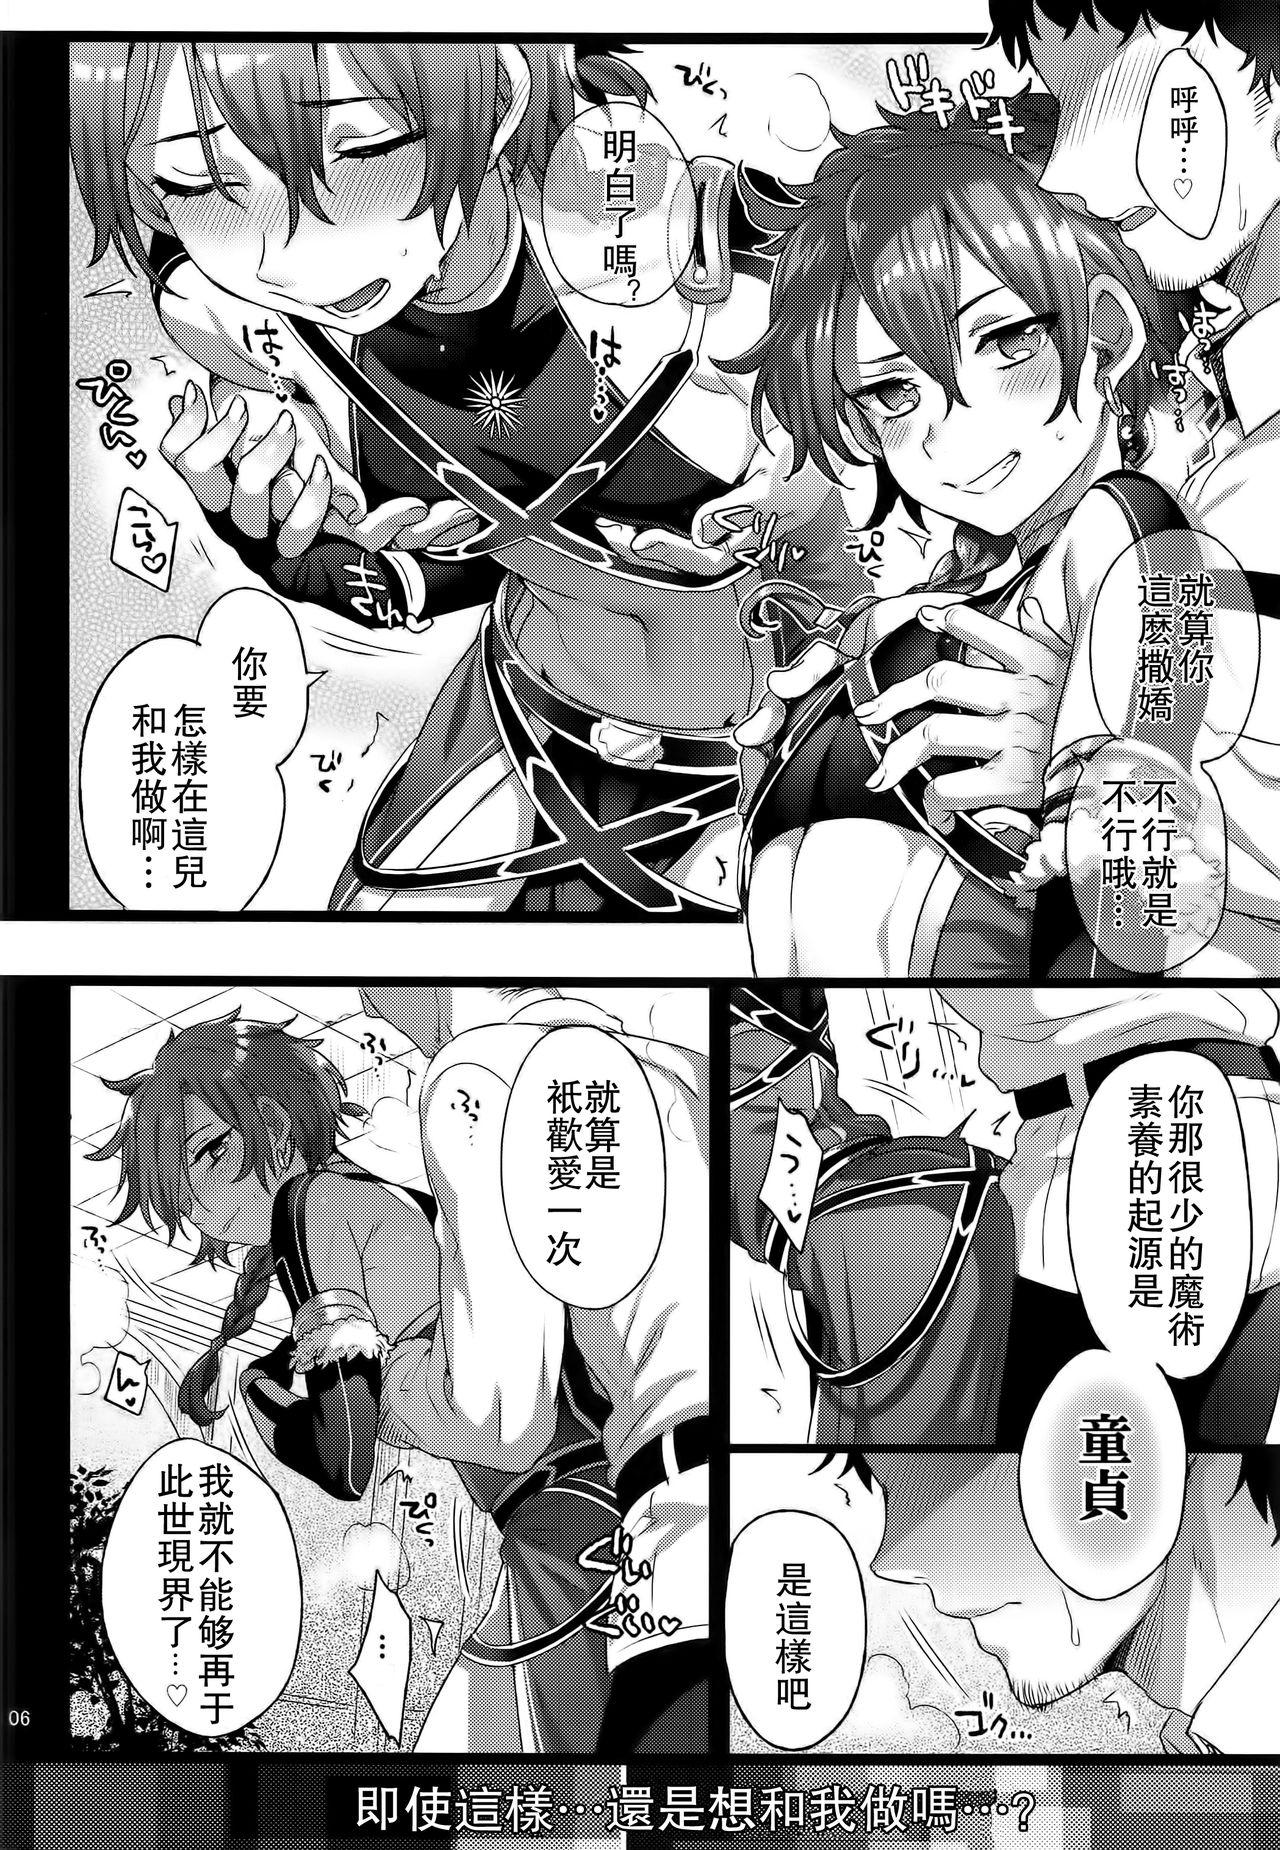 Joven Fate/DTorder course:Alexander - Fate grand order 8teen - Page 6